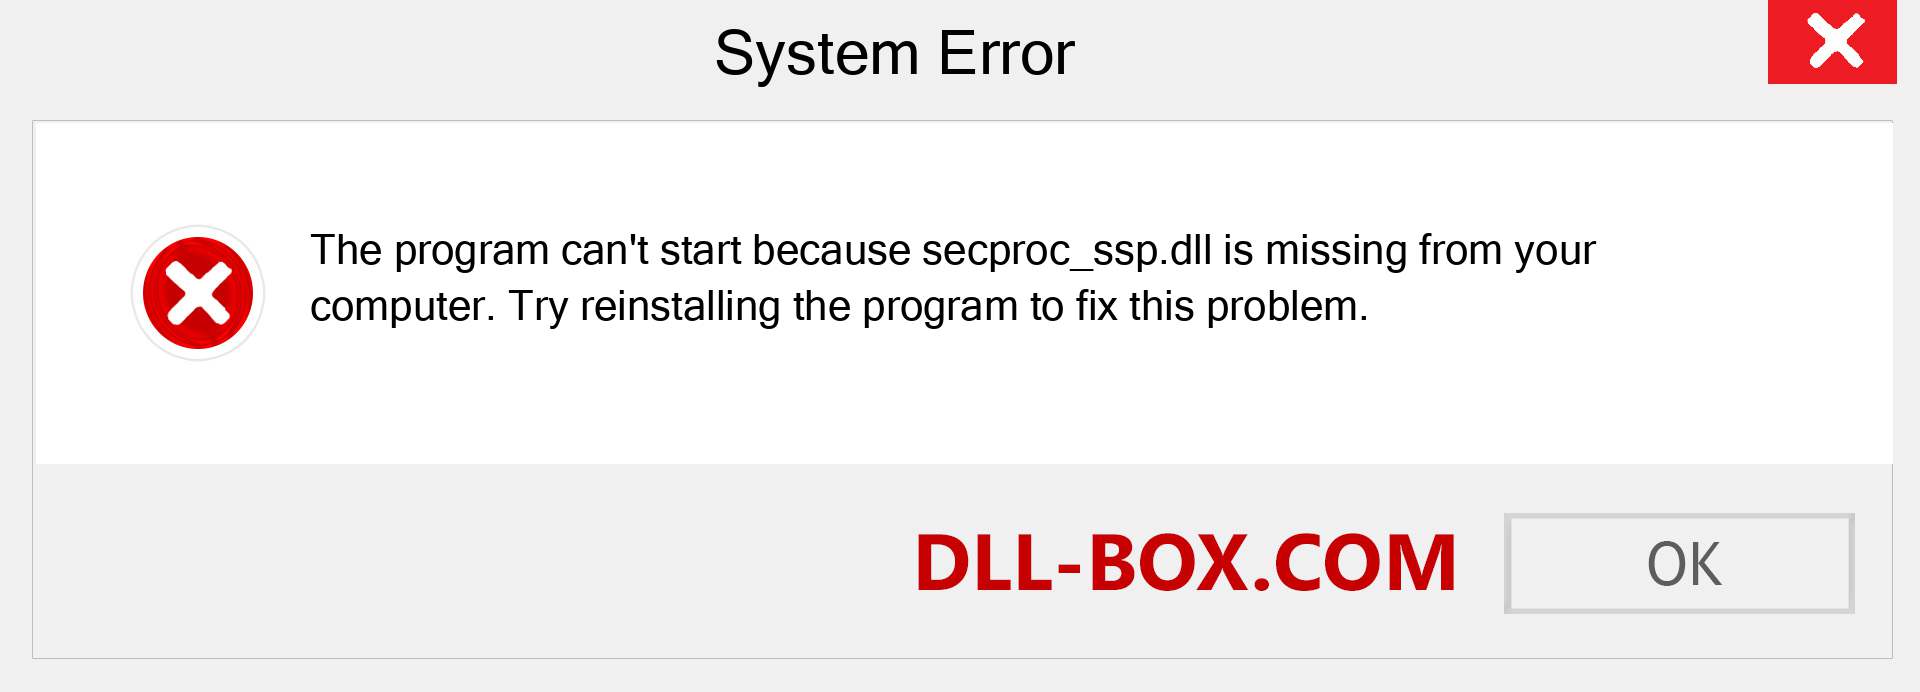  secproc_ssp.dll file is missing?. Download for Windows 7, 8, 10 - Fix  secproc_ssp dll Missing Error on Windows, photos, images